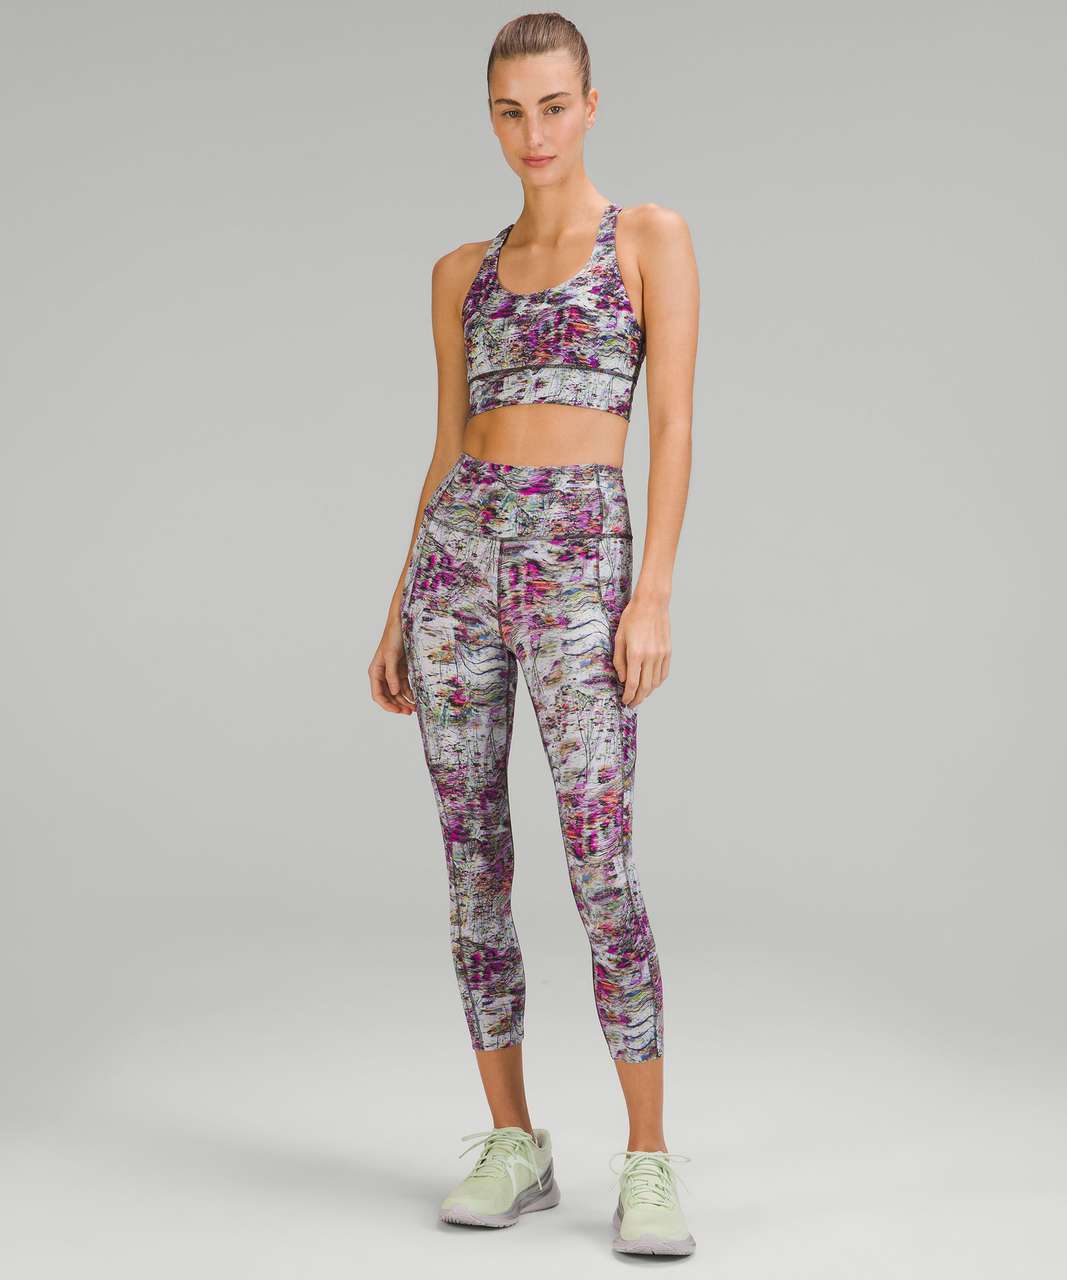 Lululemon Fast and Free High-Rise Crop 23" - Firework Floral Multi